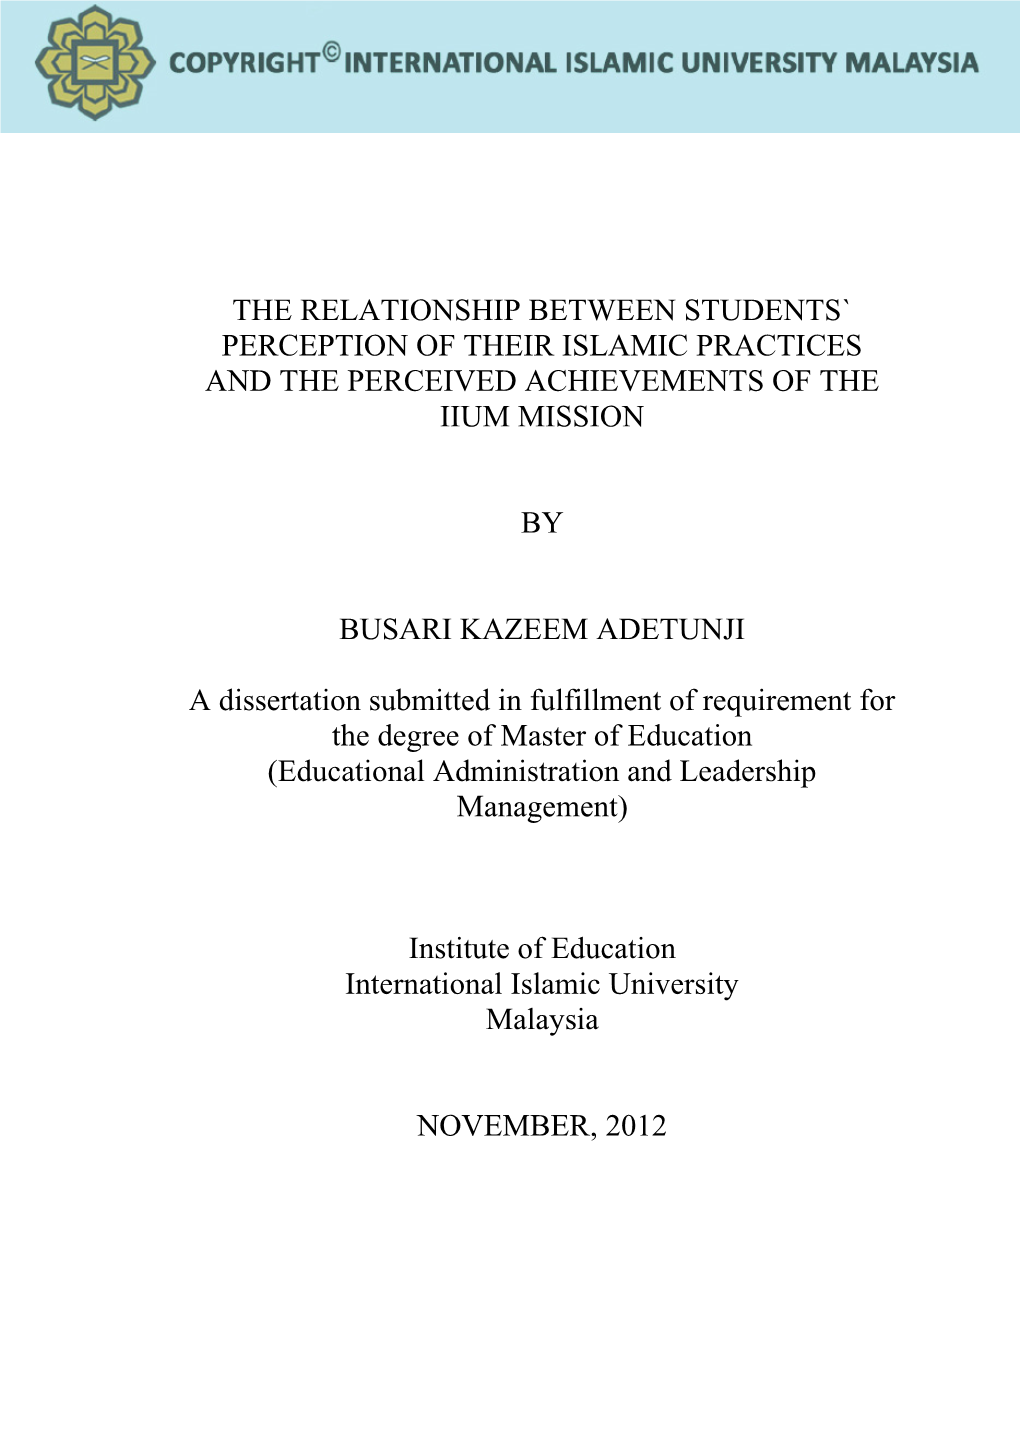 The Relationship Between Students` Perception of Their Islamic Practices and the Perceived Achievements of the Iium Mission